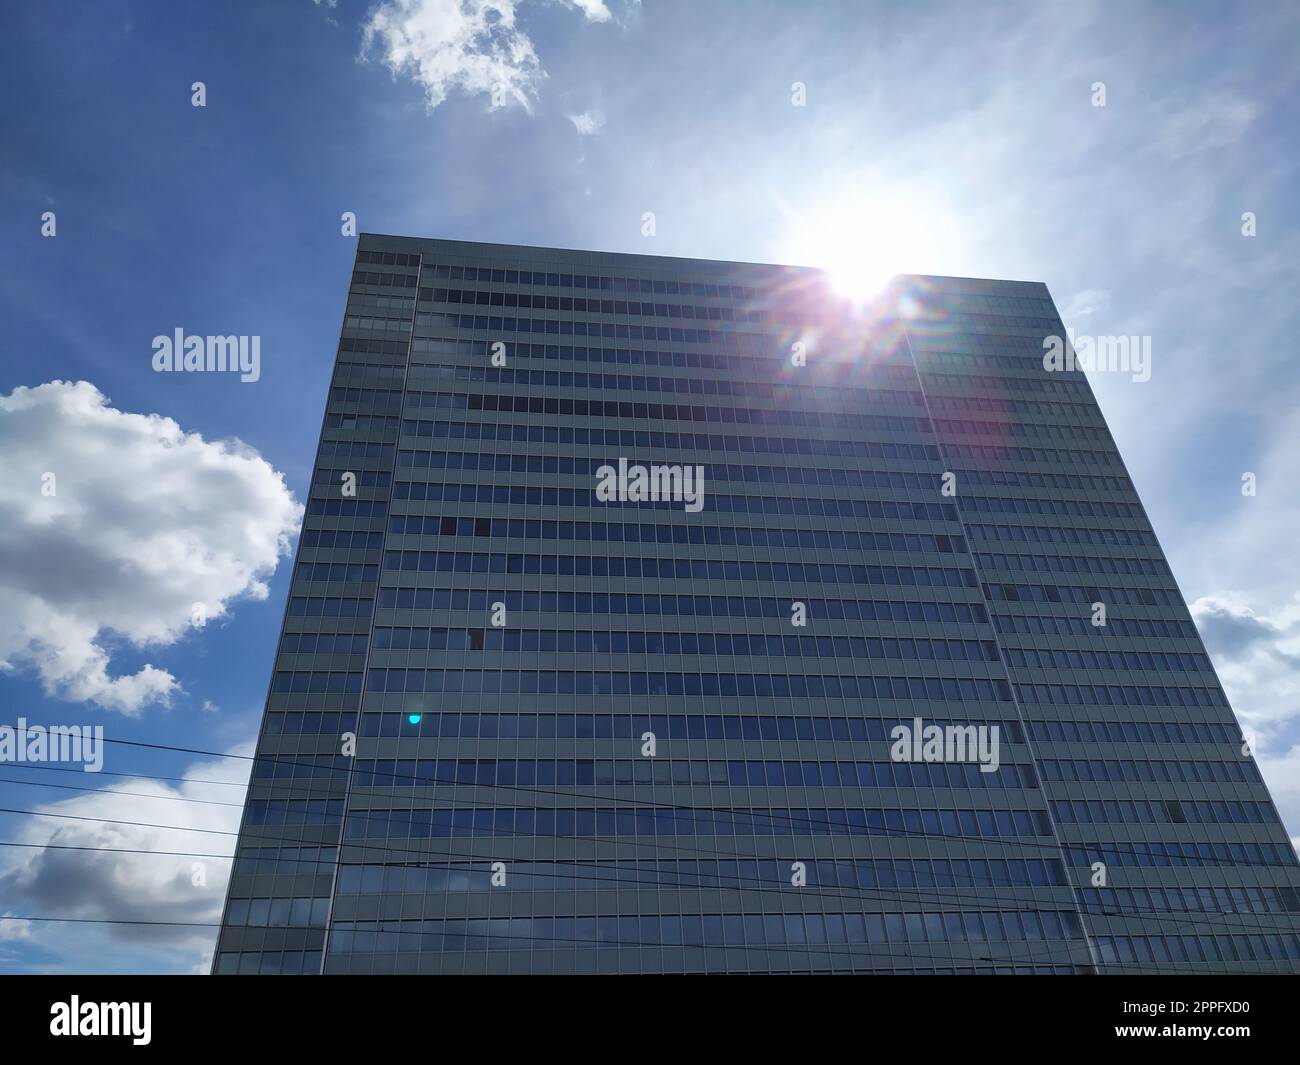 Dusseldorf, Germany - July 16th, 2022: High skyscraper Dreischeibenhaus from Thyssenkrupp in DÃ¼sseldorf as tall building in summer as contemporary architecture and clean glass facade blue sky clouds Stock Photo